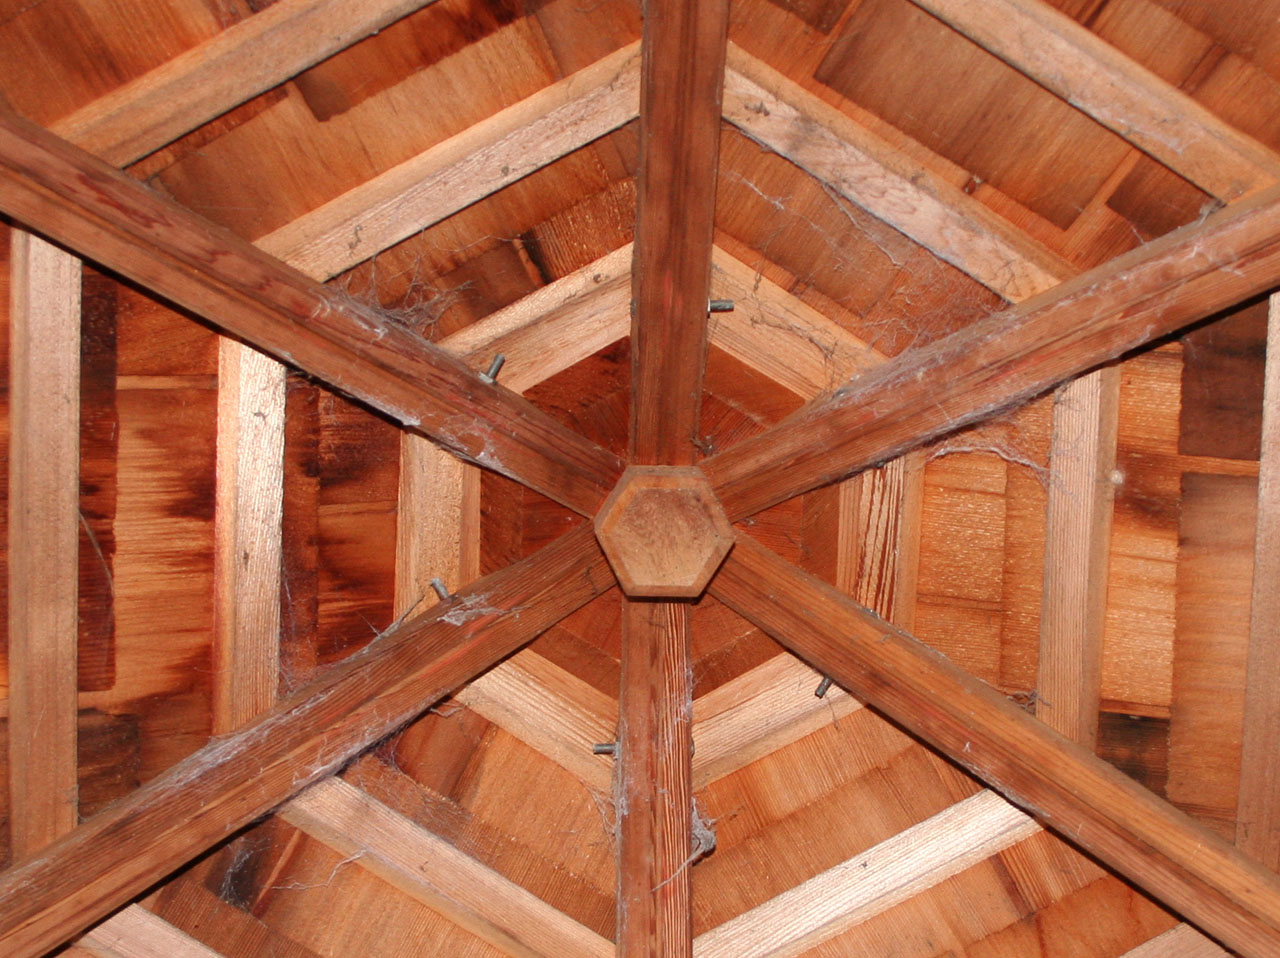 Wooden Roof